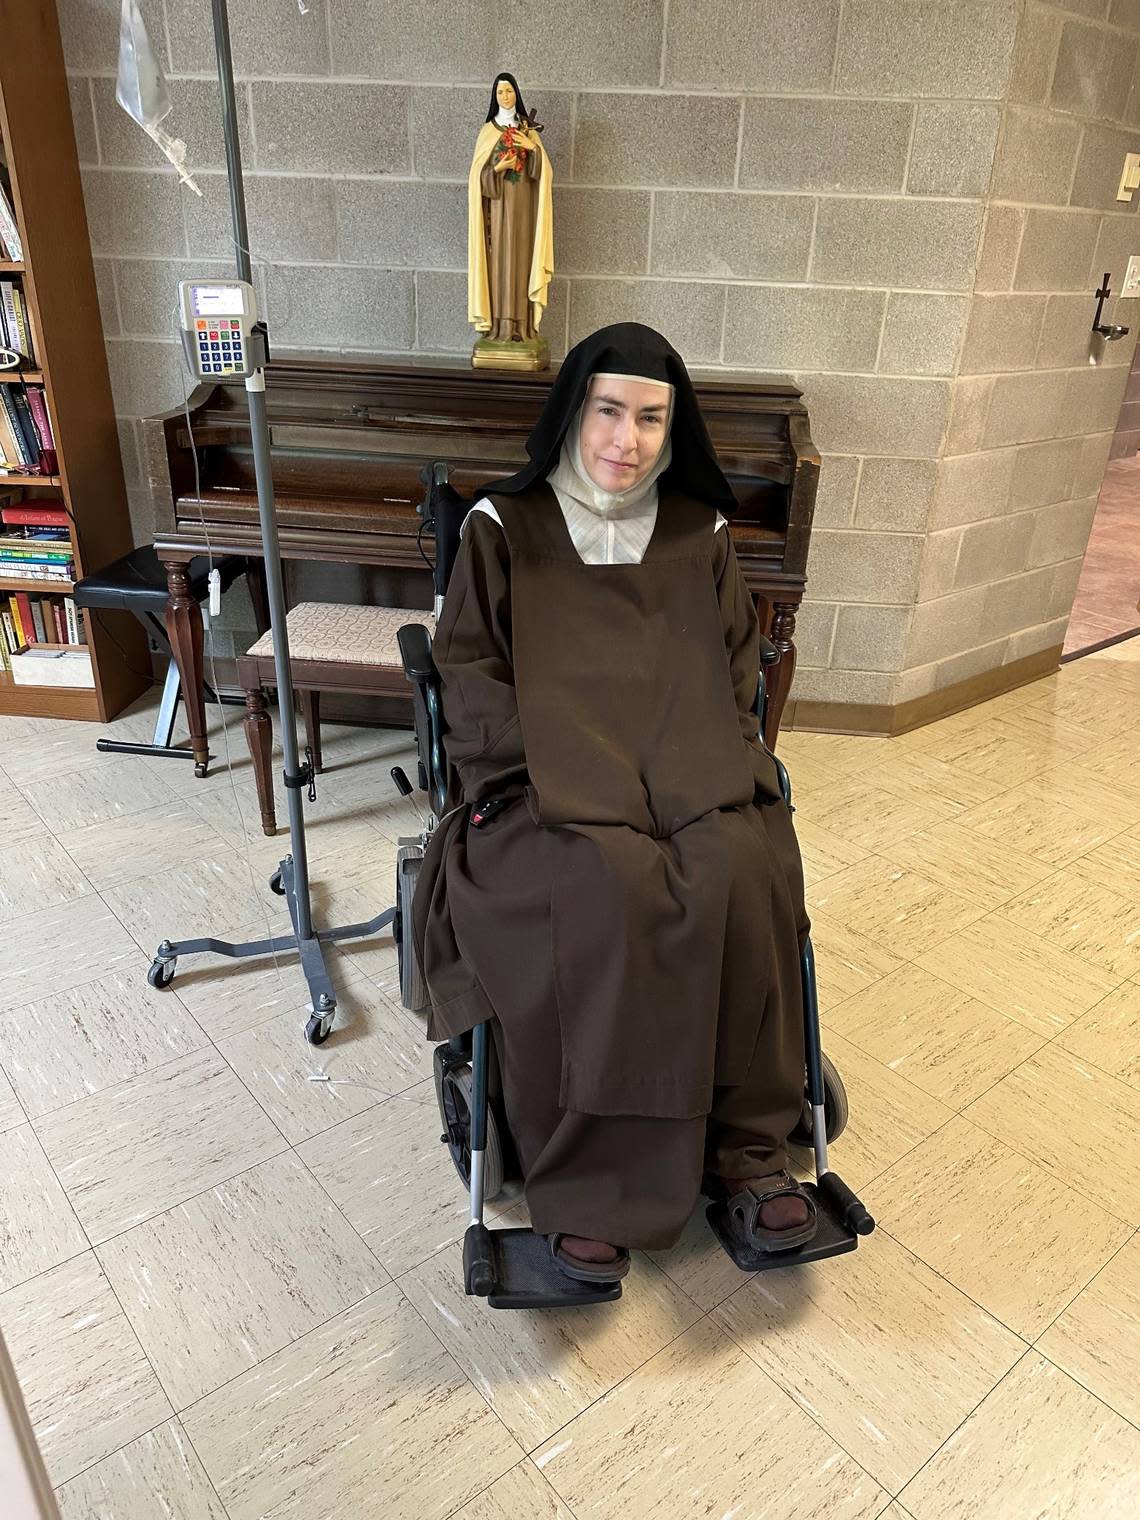 Reverend Mother Superior Teresa Agnes Gerlach of the Monastery of the Most Holy Trinity has filed a lawsuit against Bishop Michael Olson and the Diocese of Fort Worth. Matthew Bobo